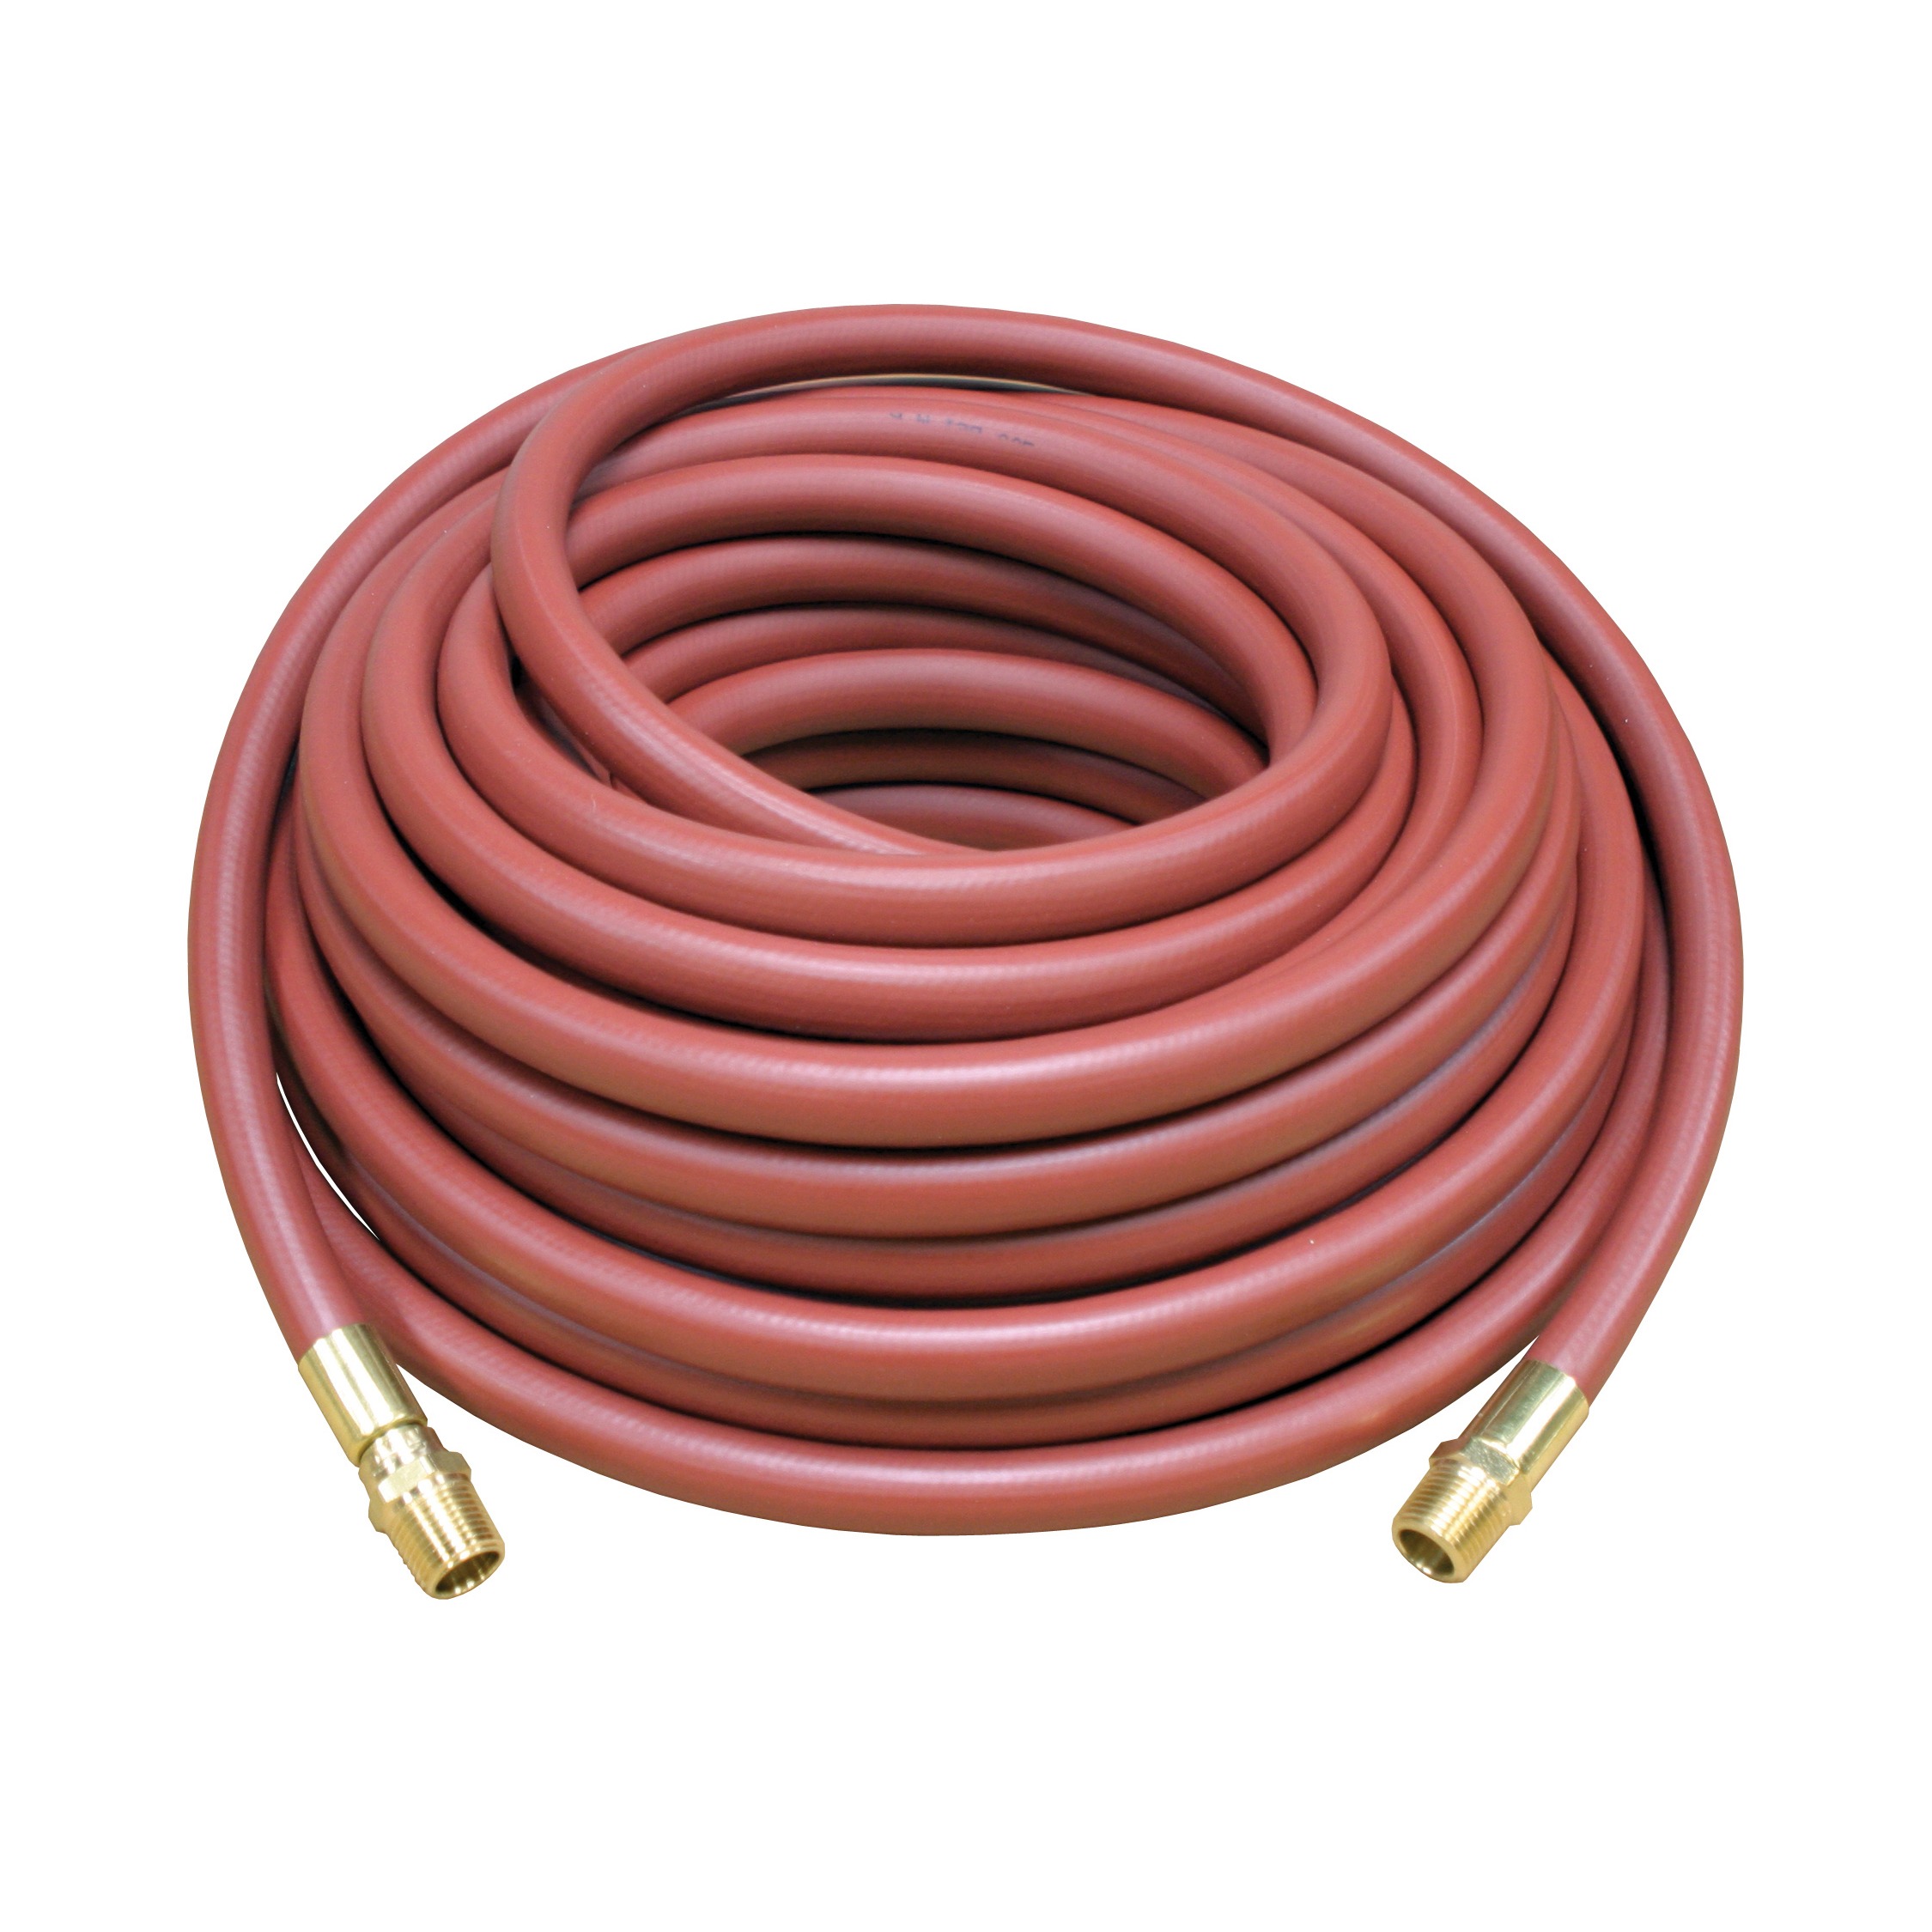 Reelcraft S601026-200 - 3/4 in. x 200 ft. Low Pressure Air/Water Hose